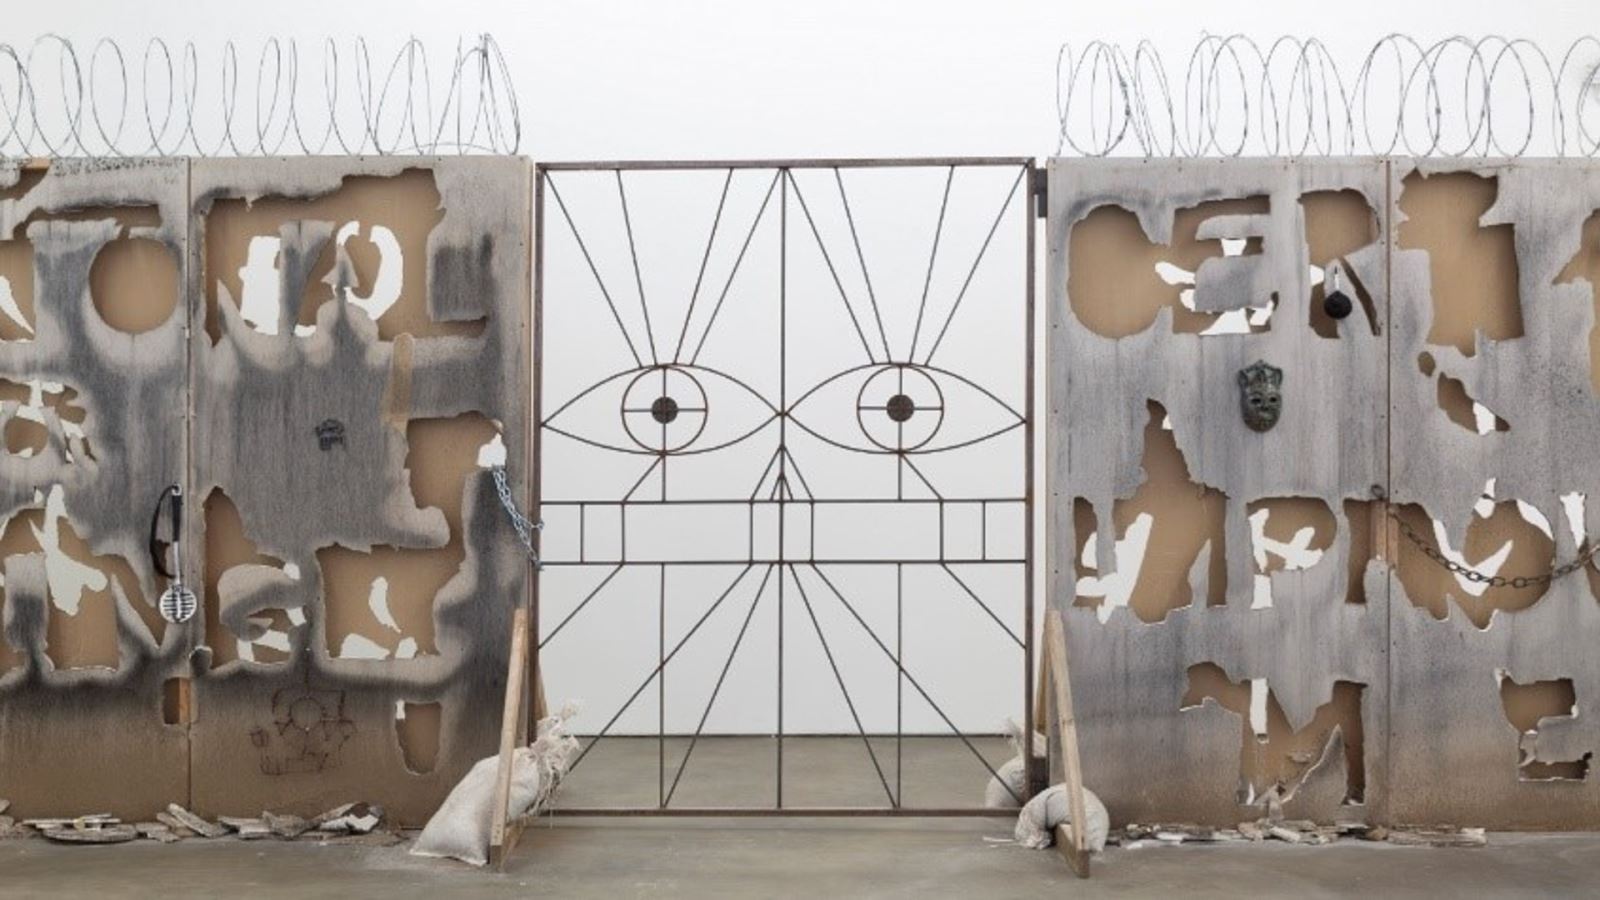 Candice Lin, A Robot Spoke What My Father Wrote (2019), Cut sheetrock, razor wire, bone black pigment and mould, ceramic, welded gate, miscellaneous drawings and printed material. Courtesy the artist and François Ghebaly, Los Angeles